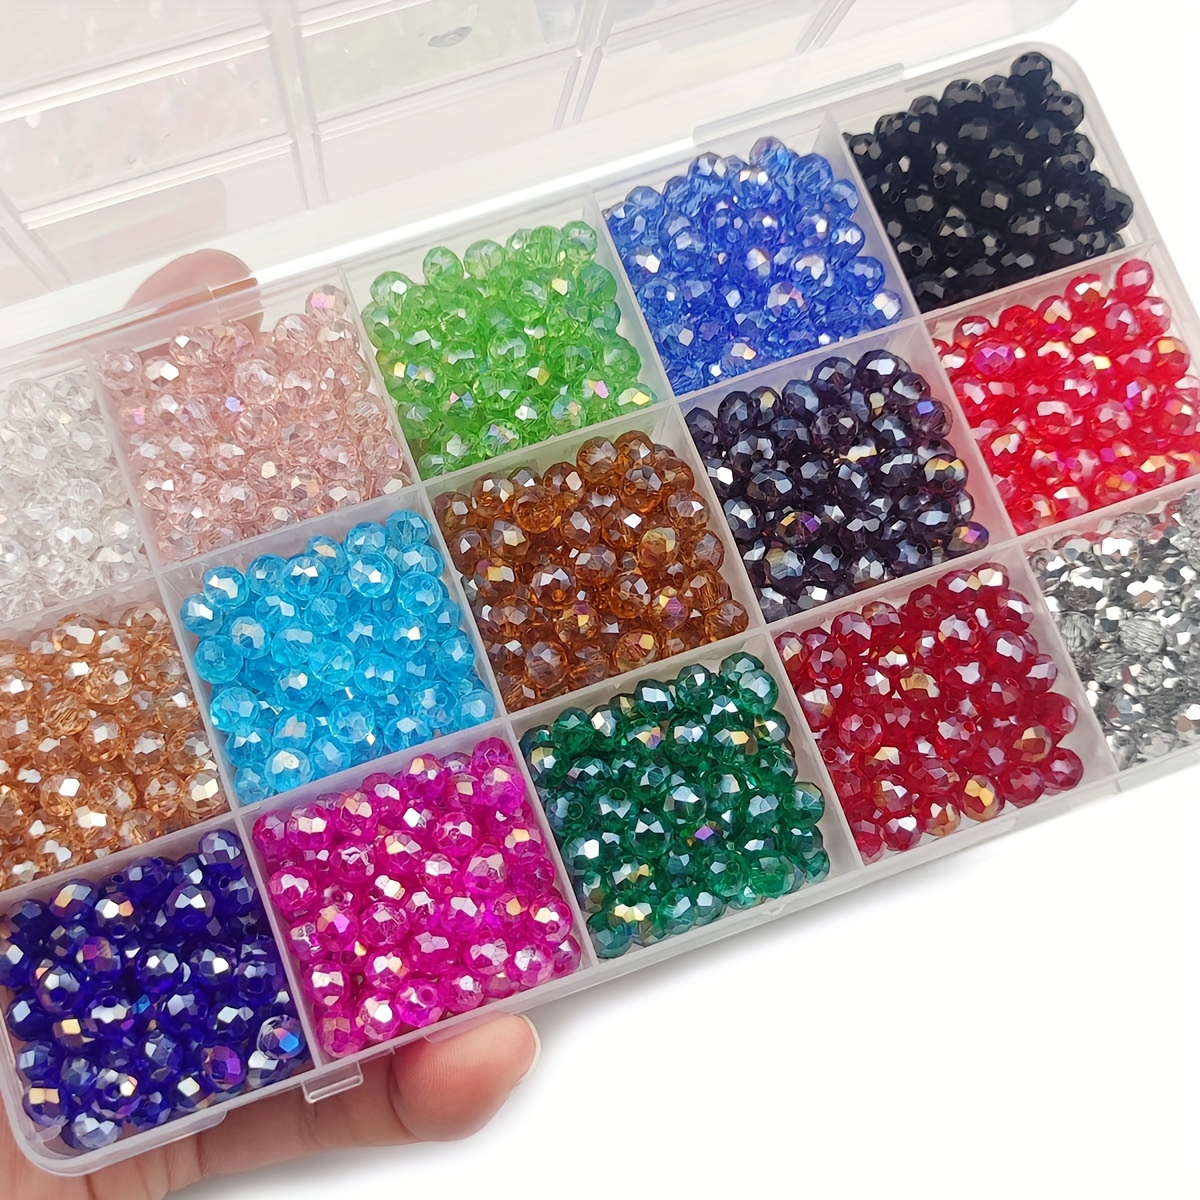 

750-piece Ab Color Glass Crystal Beads Set - 15 Vibrant Colors, 6mm Faceted For Diy Jewelry Making, Handcrafted Bracelet & Necklace Supplies Charms For Jewelry Making Beads For Jewelry Making